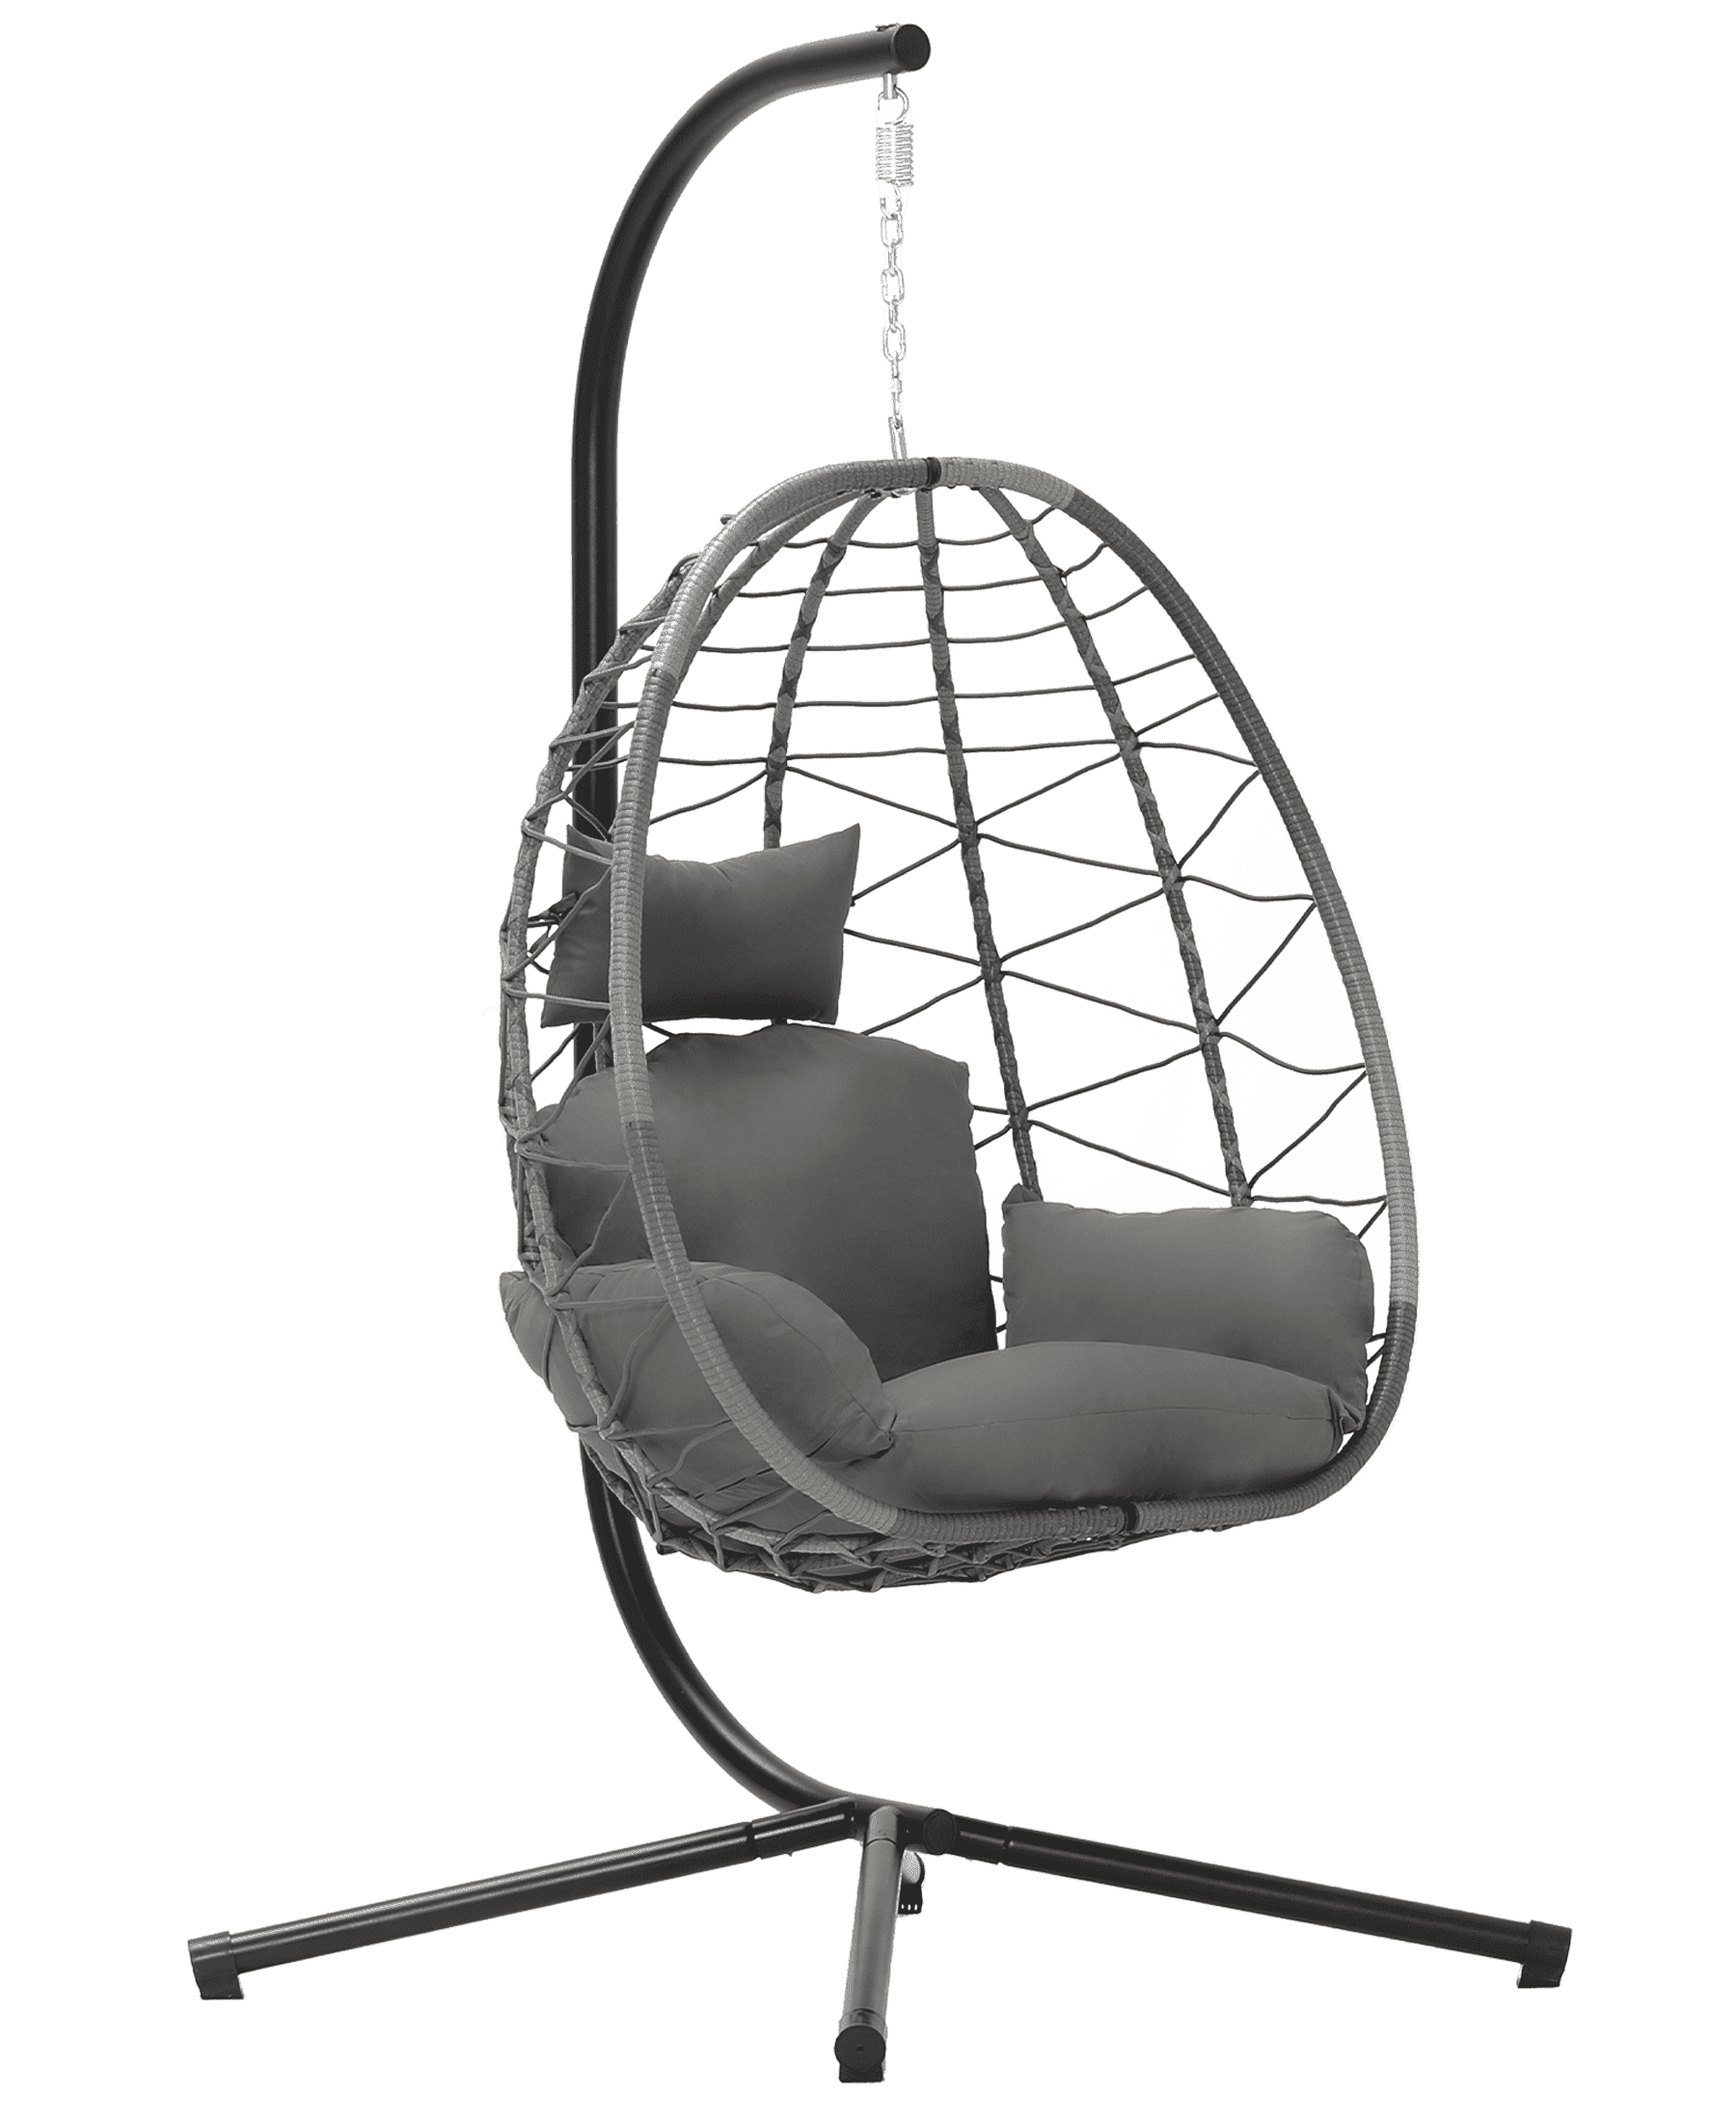 Bifanuo Indoor/Outdoor Wicker Swing Egg Chair Hammock Hanging Chair Nest Basket with Stand, UV Resistant Removable & Washable Cushions,350LB Capacity for Bedroom, Balcony, Garden and Poolside (Grey) - image 1 of 6